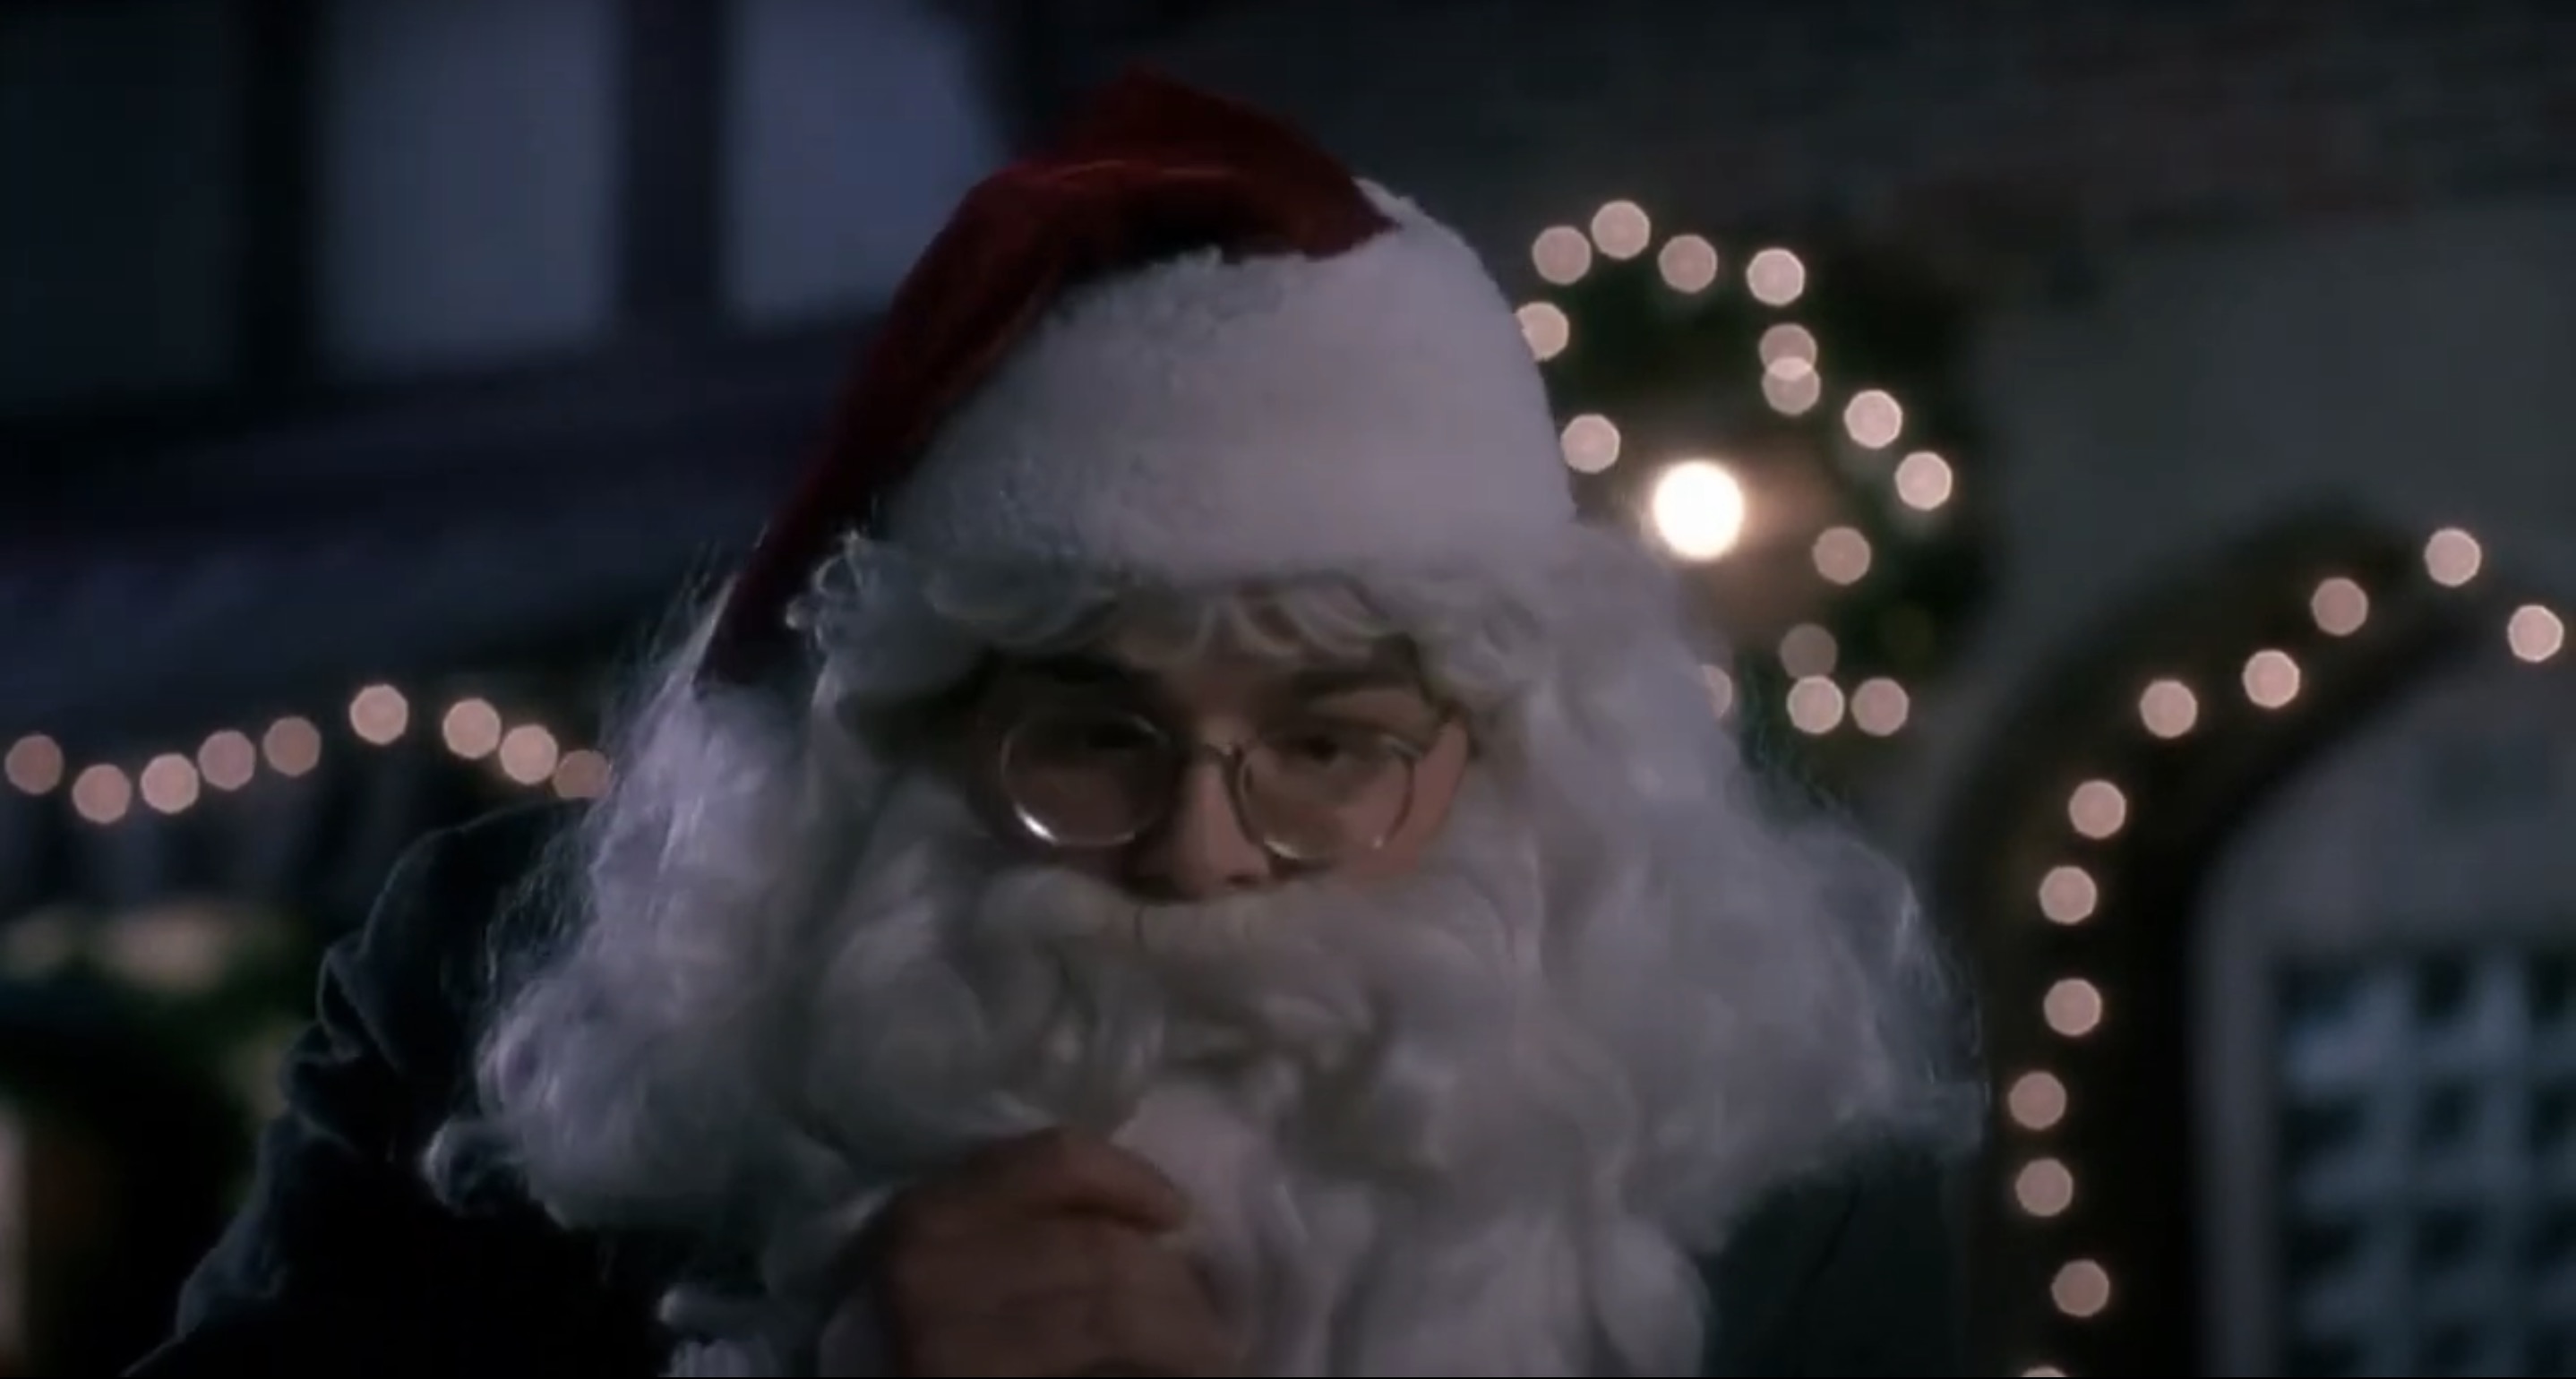 The actor is known for many comedy hits, including playing Santa in Home Alone